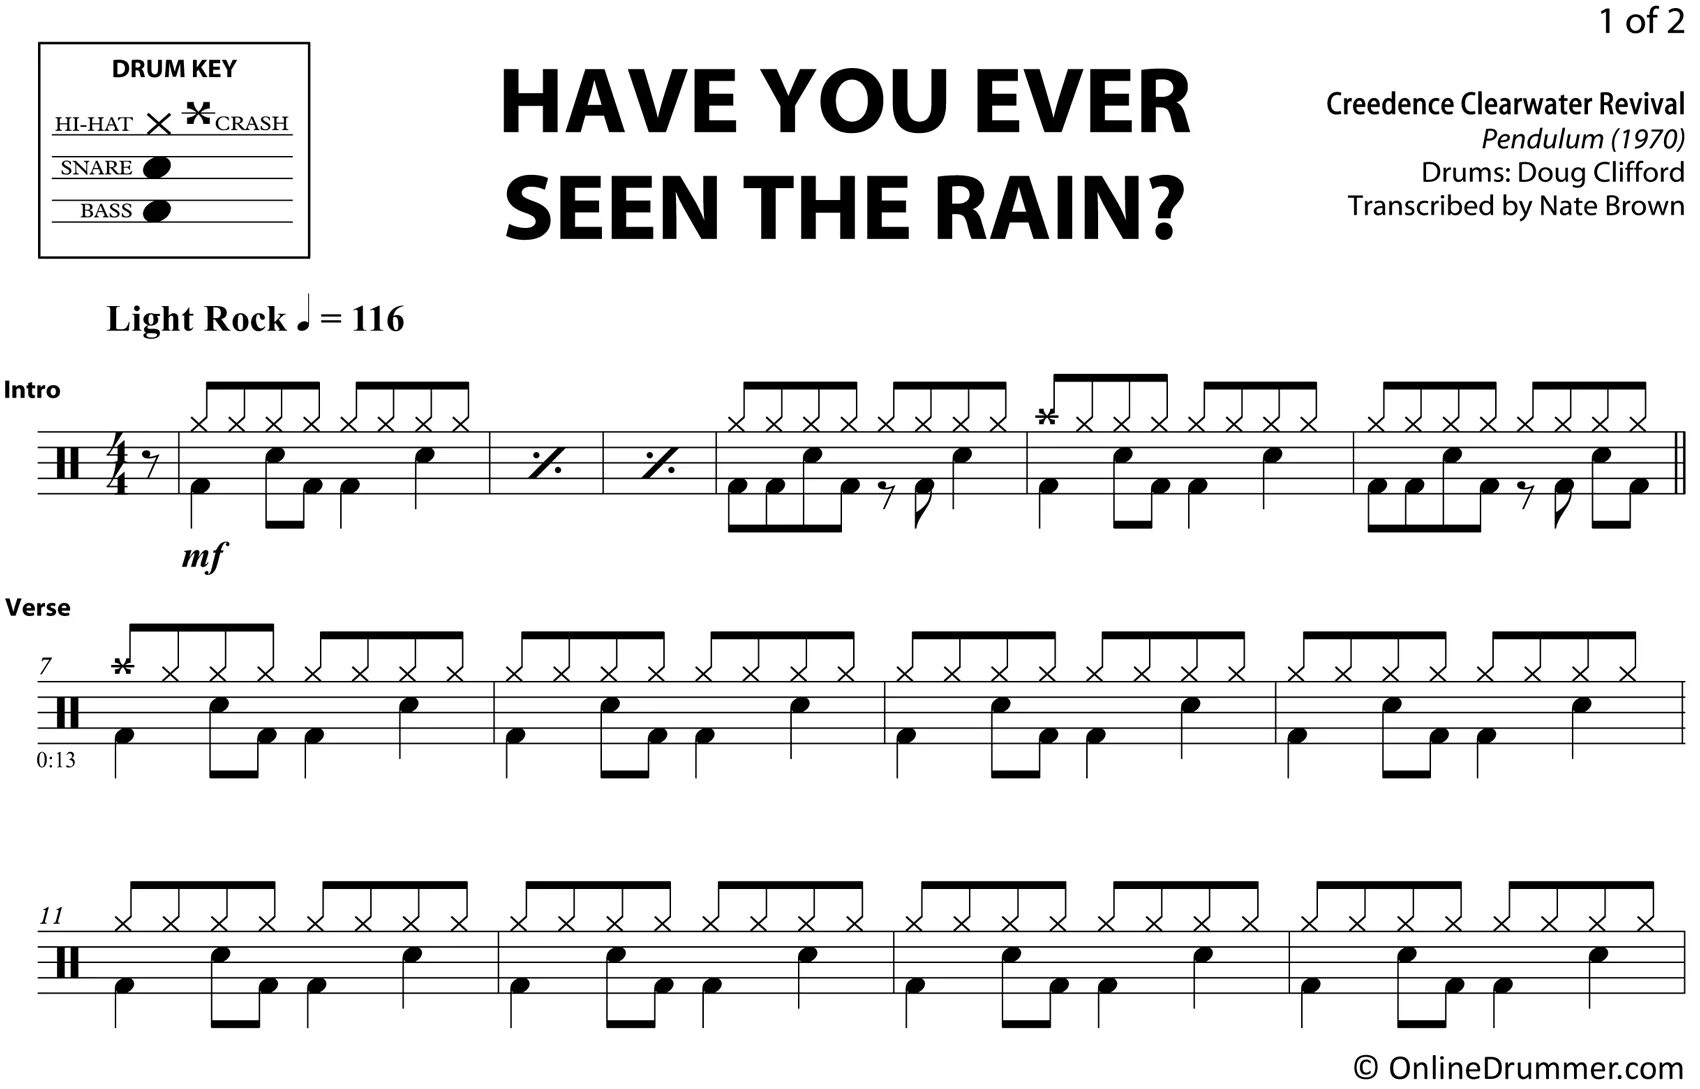 Creedence clearwater revival rain. Have you ever seen the Rain? От Creedence Clearwater Revival. Creedence Clearwater Revival - have you ever seen the Rain (1970). Have you ever seen the Rain Криденс. Have you ever seen the Rain Ноты.